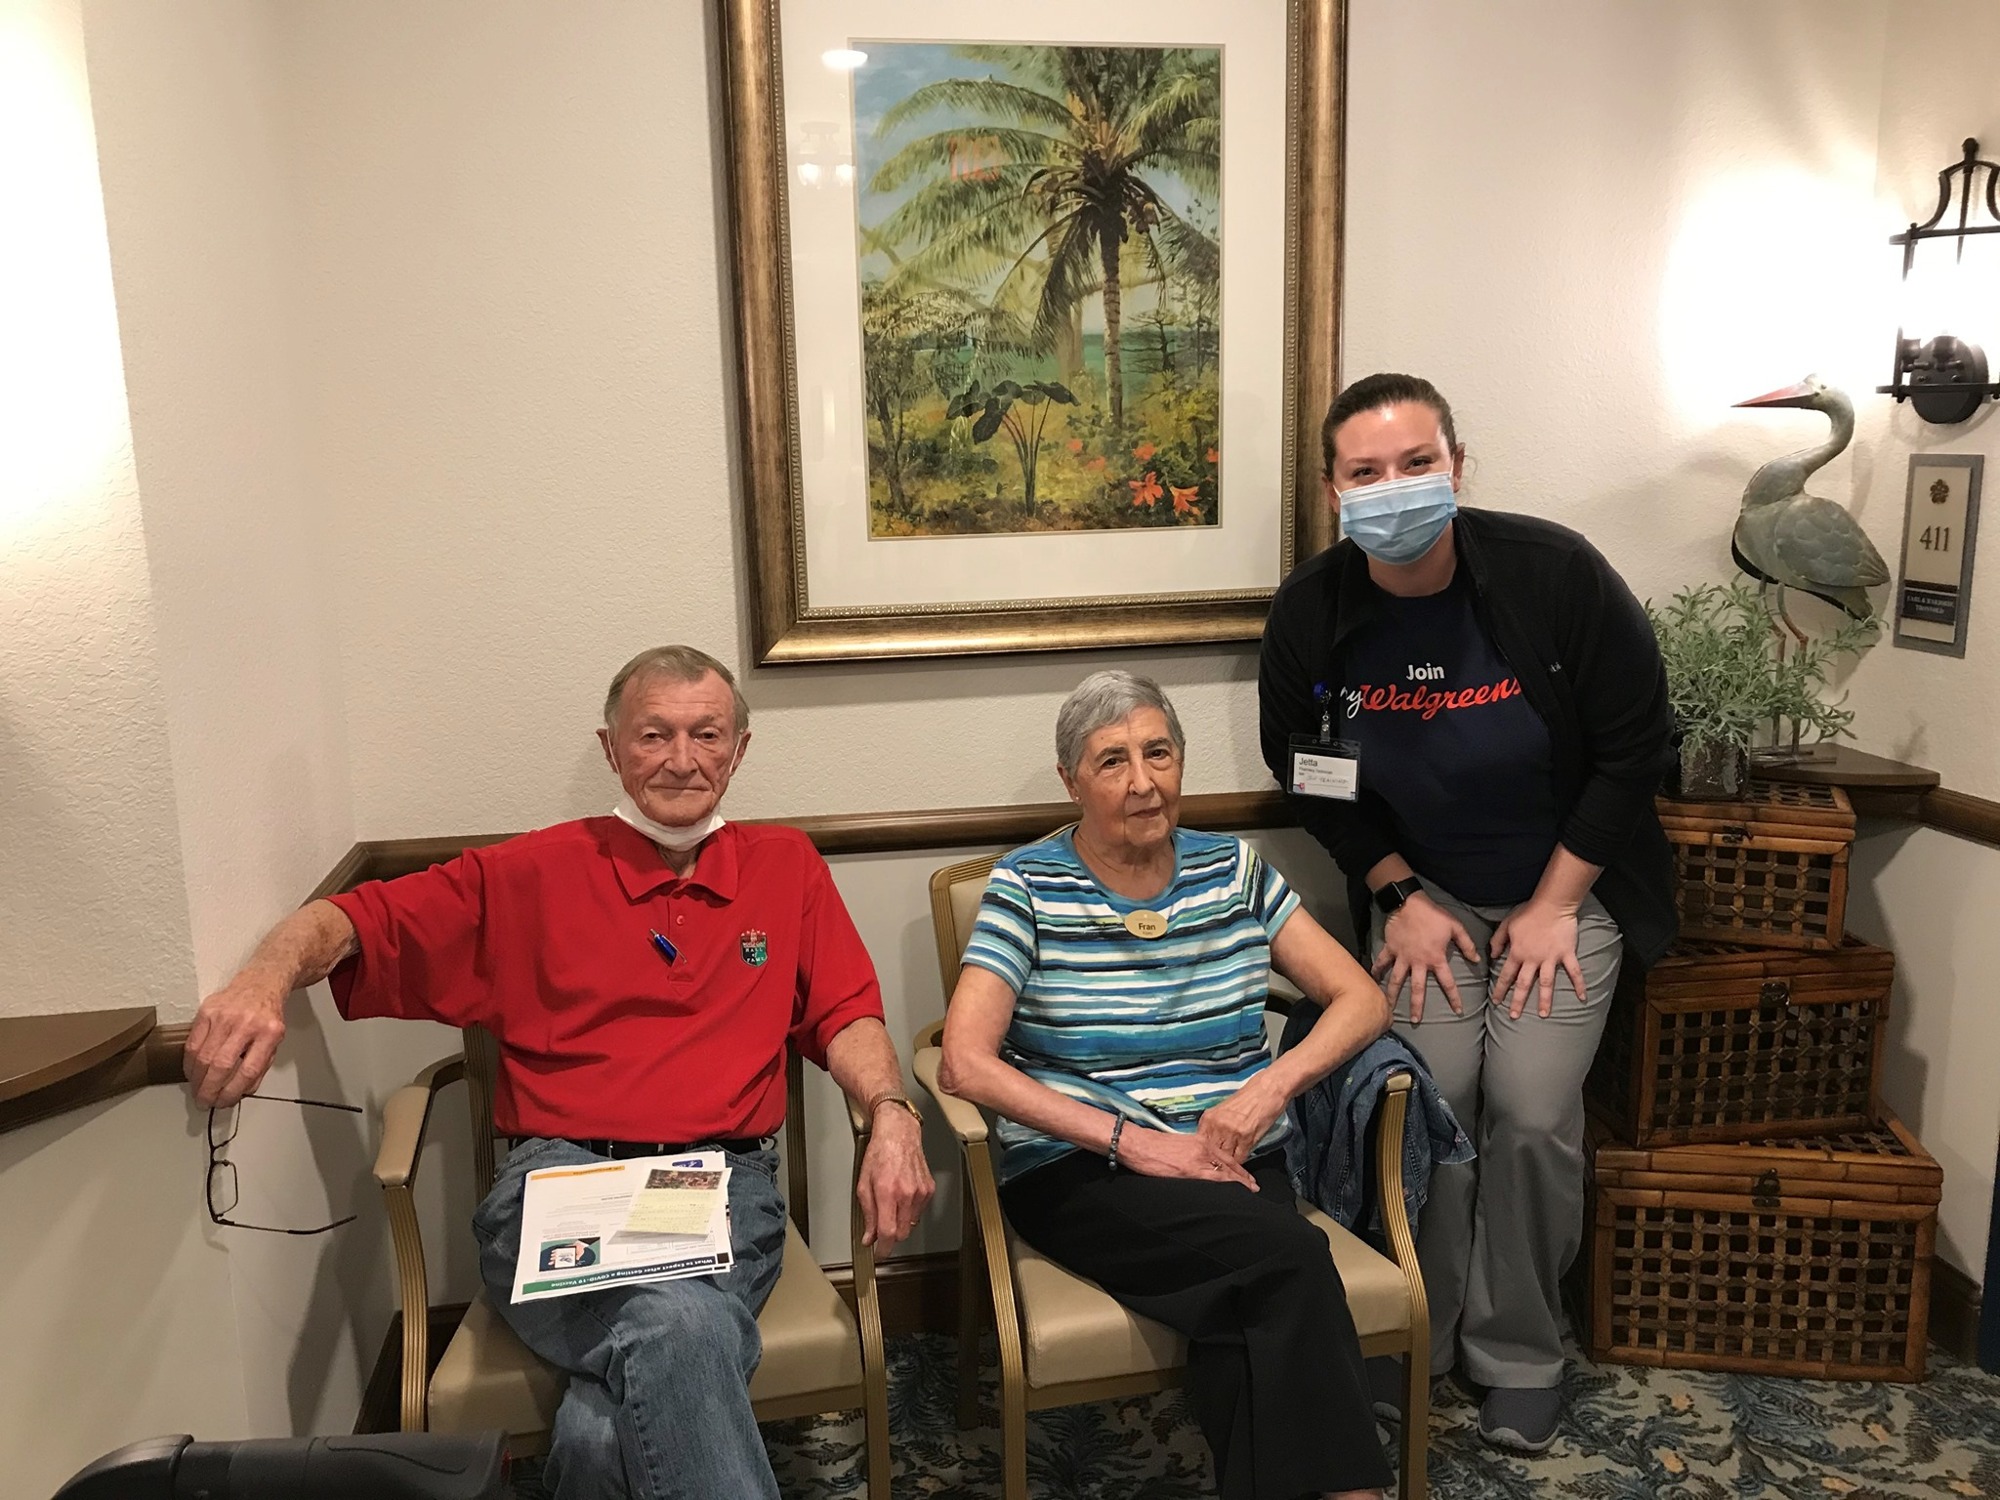 Ed Kipley and Fran Kipley wait for 15 minutes with a Walgreens employee to monitor for adverse effects after receiving COVID-19 vaccines Jan. 11 at Grand Living at Lakewood Ranch. (Photo courtesy of Michelle Orlando)